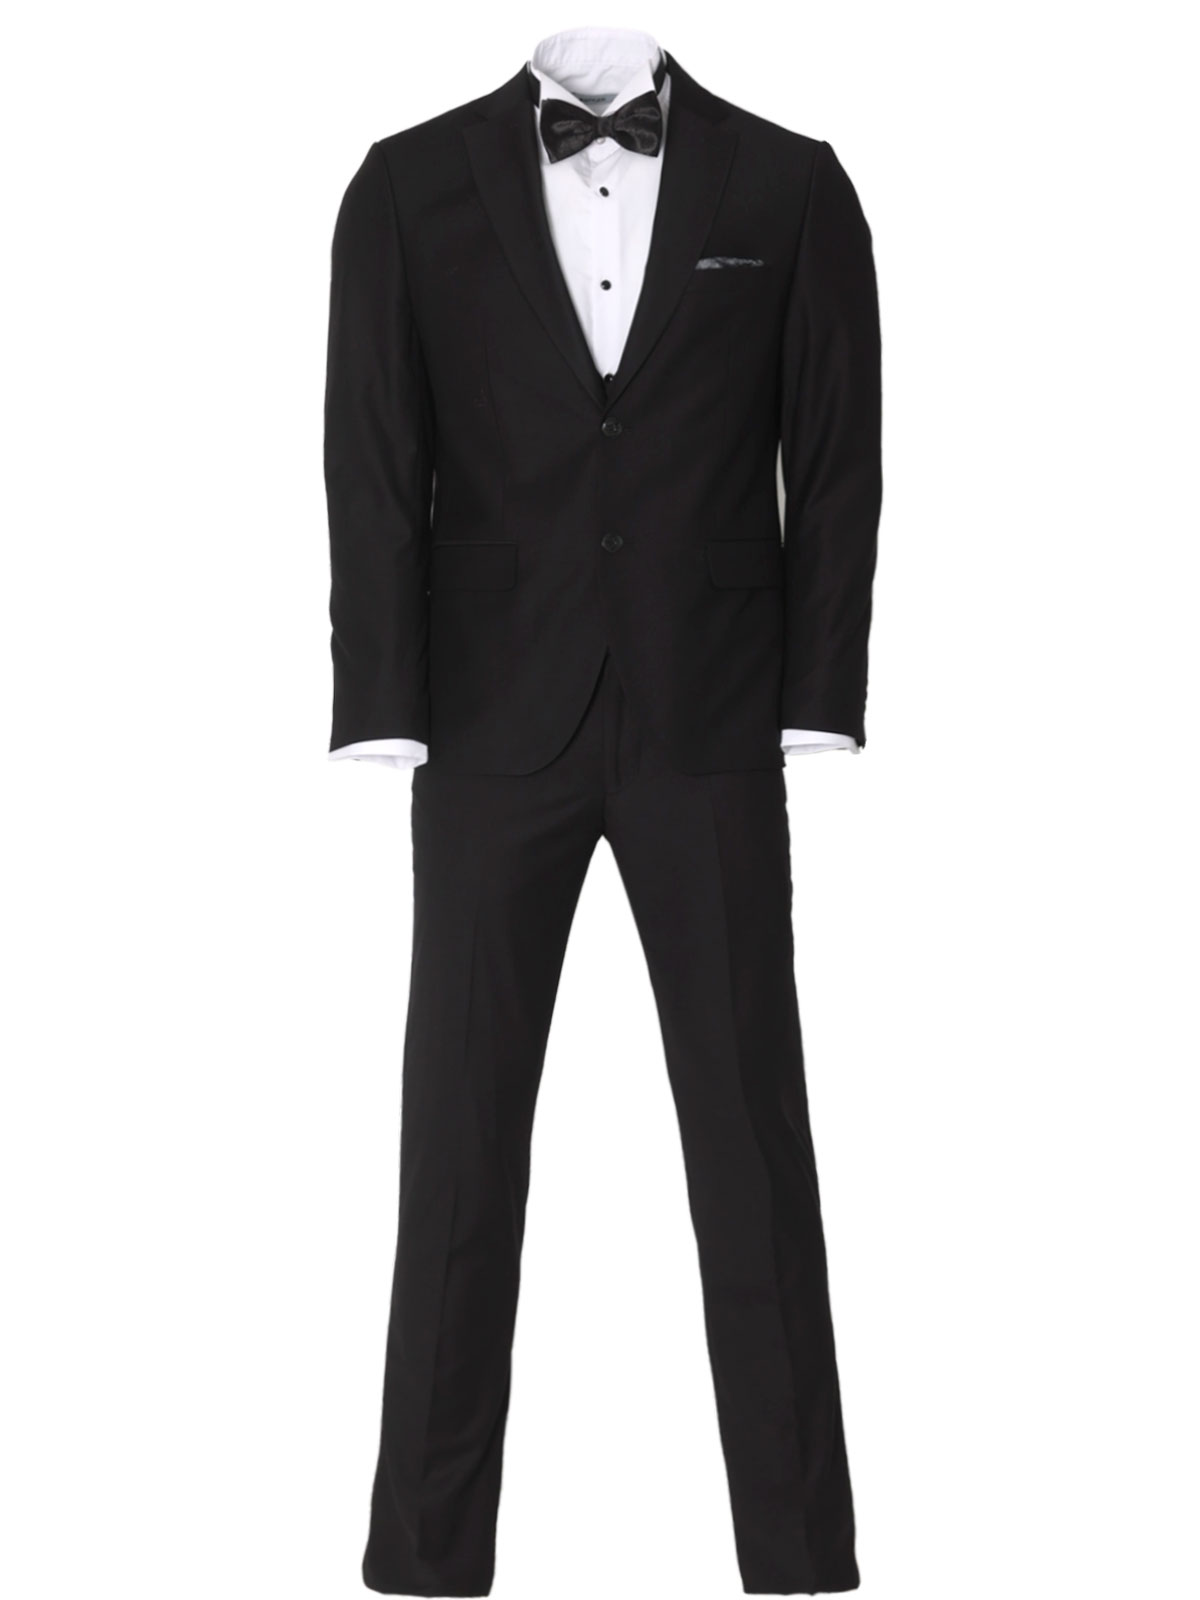 Suit in classic black color - 68074 € 236.22 img2